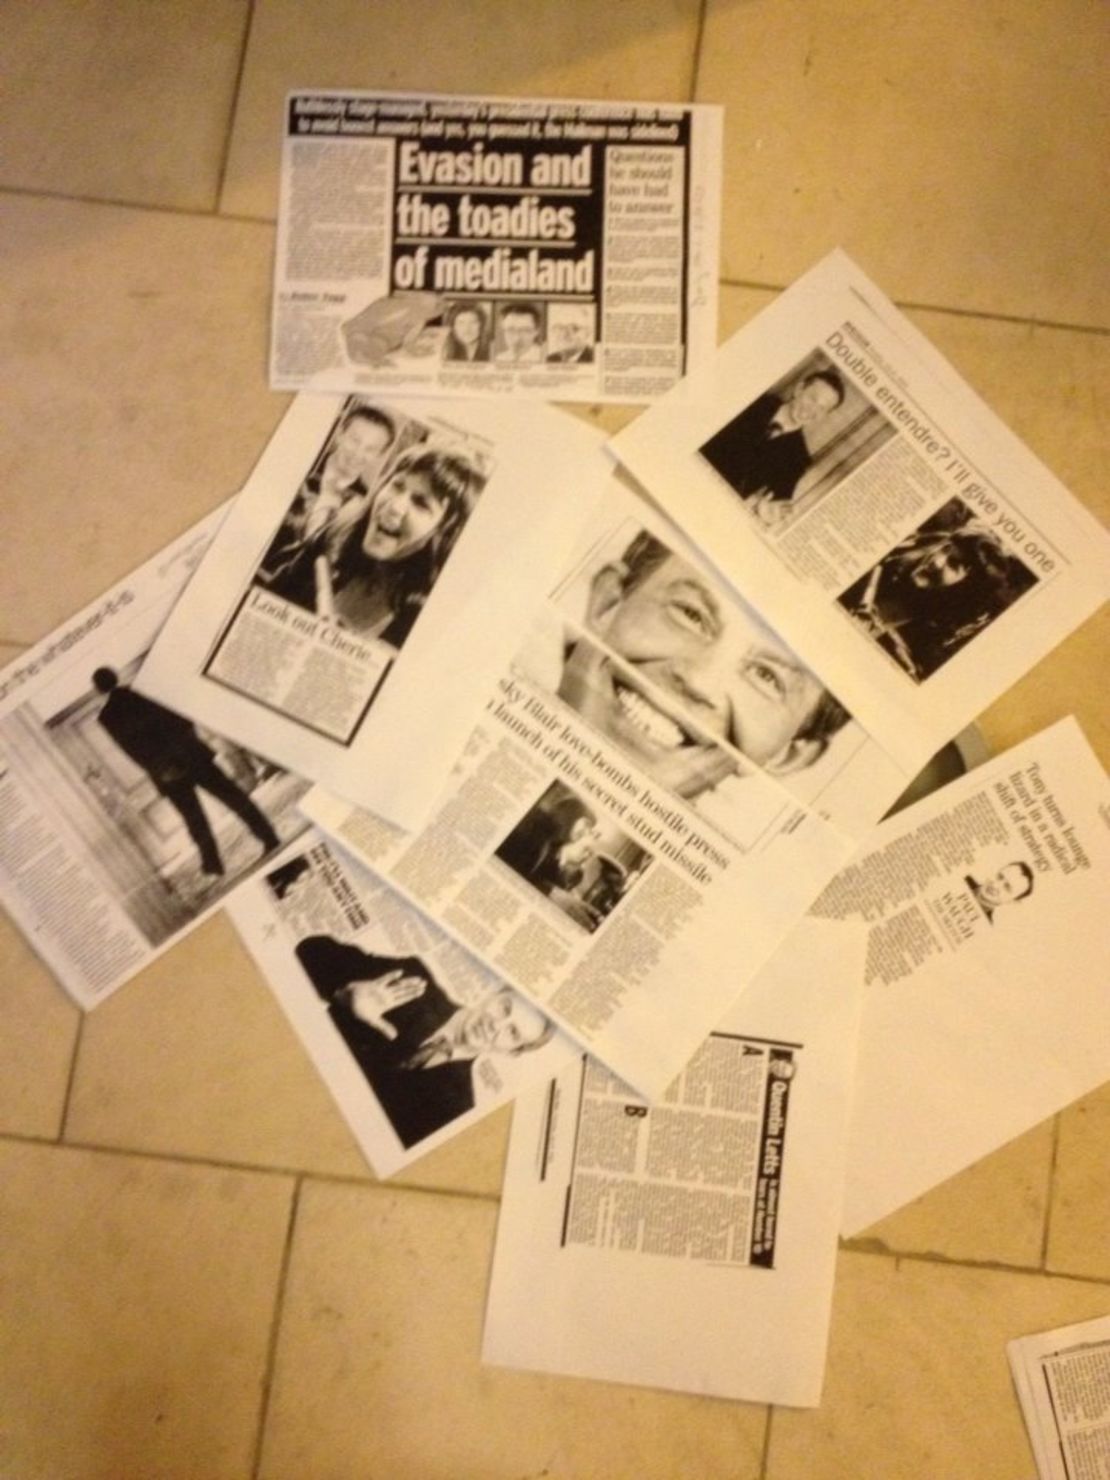 Cuttings from British newspapers following the press conference with Tony Blair. 